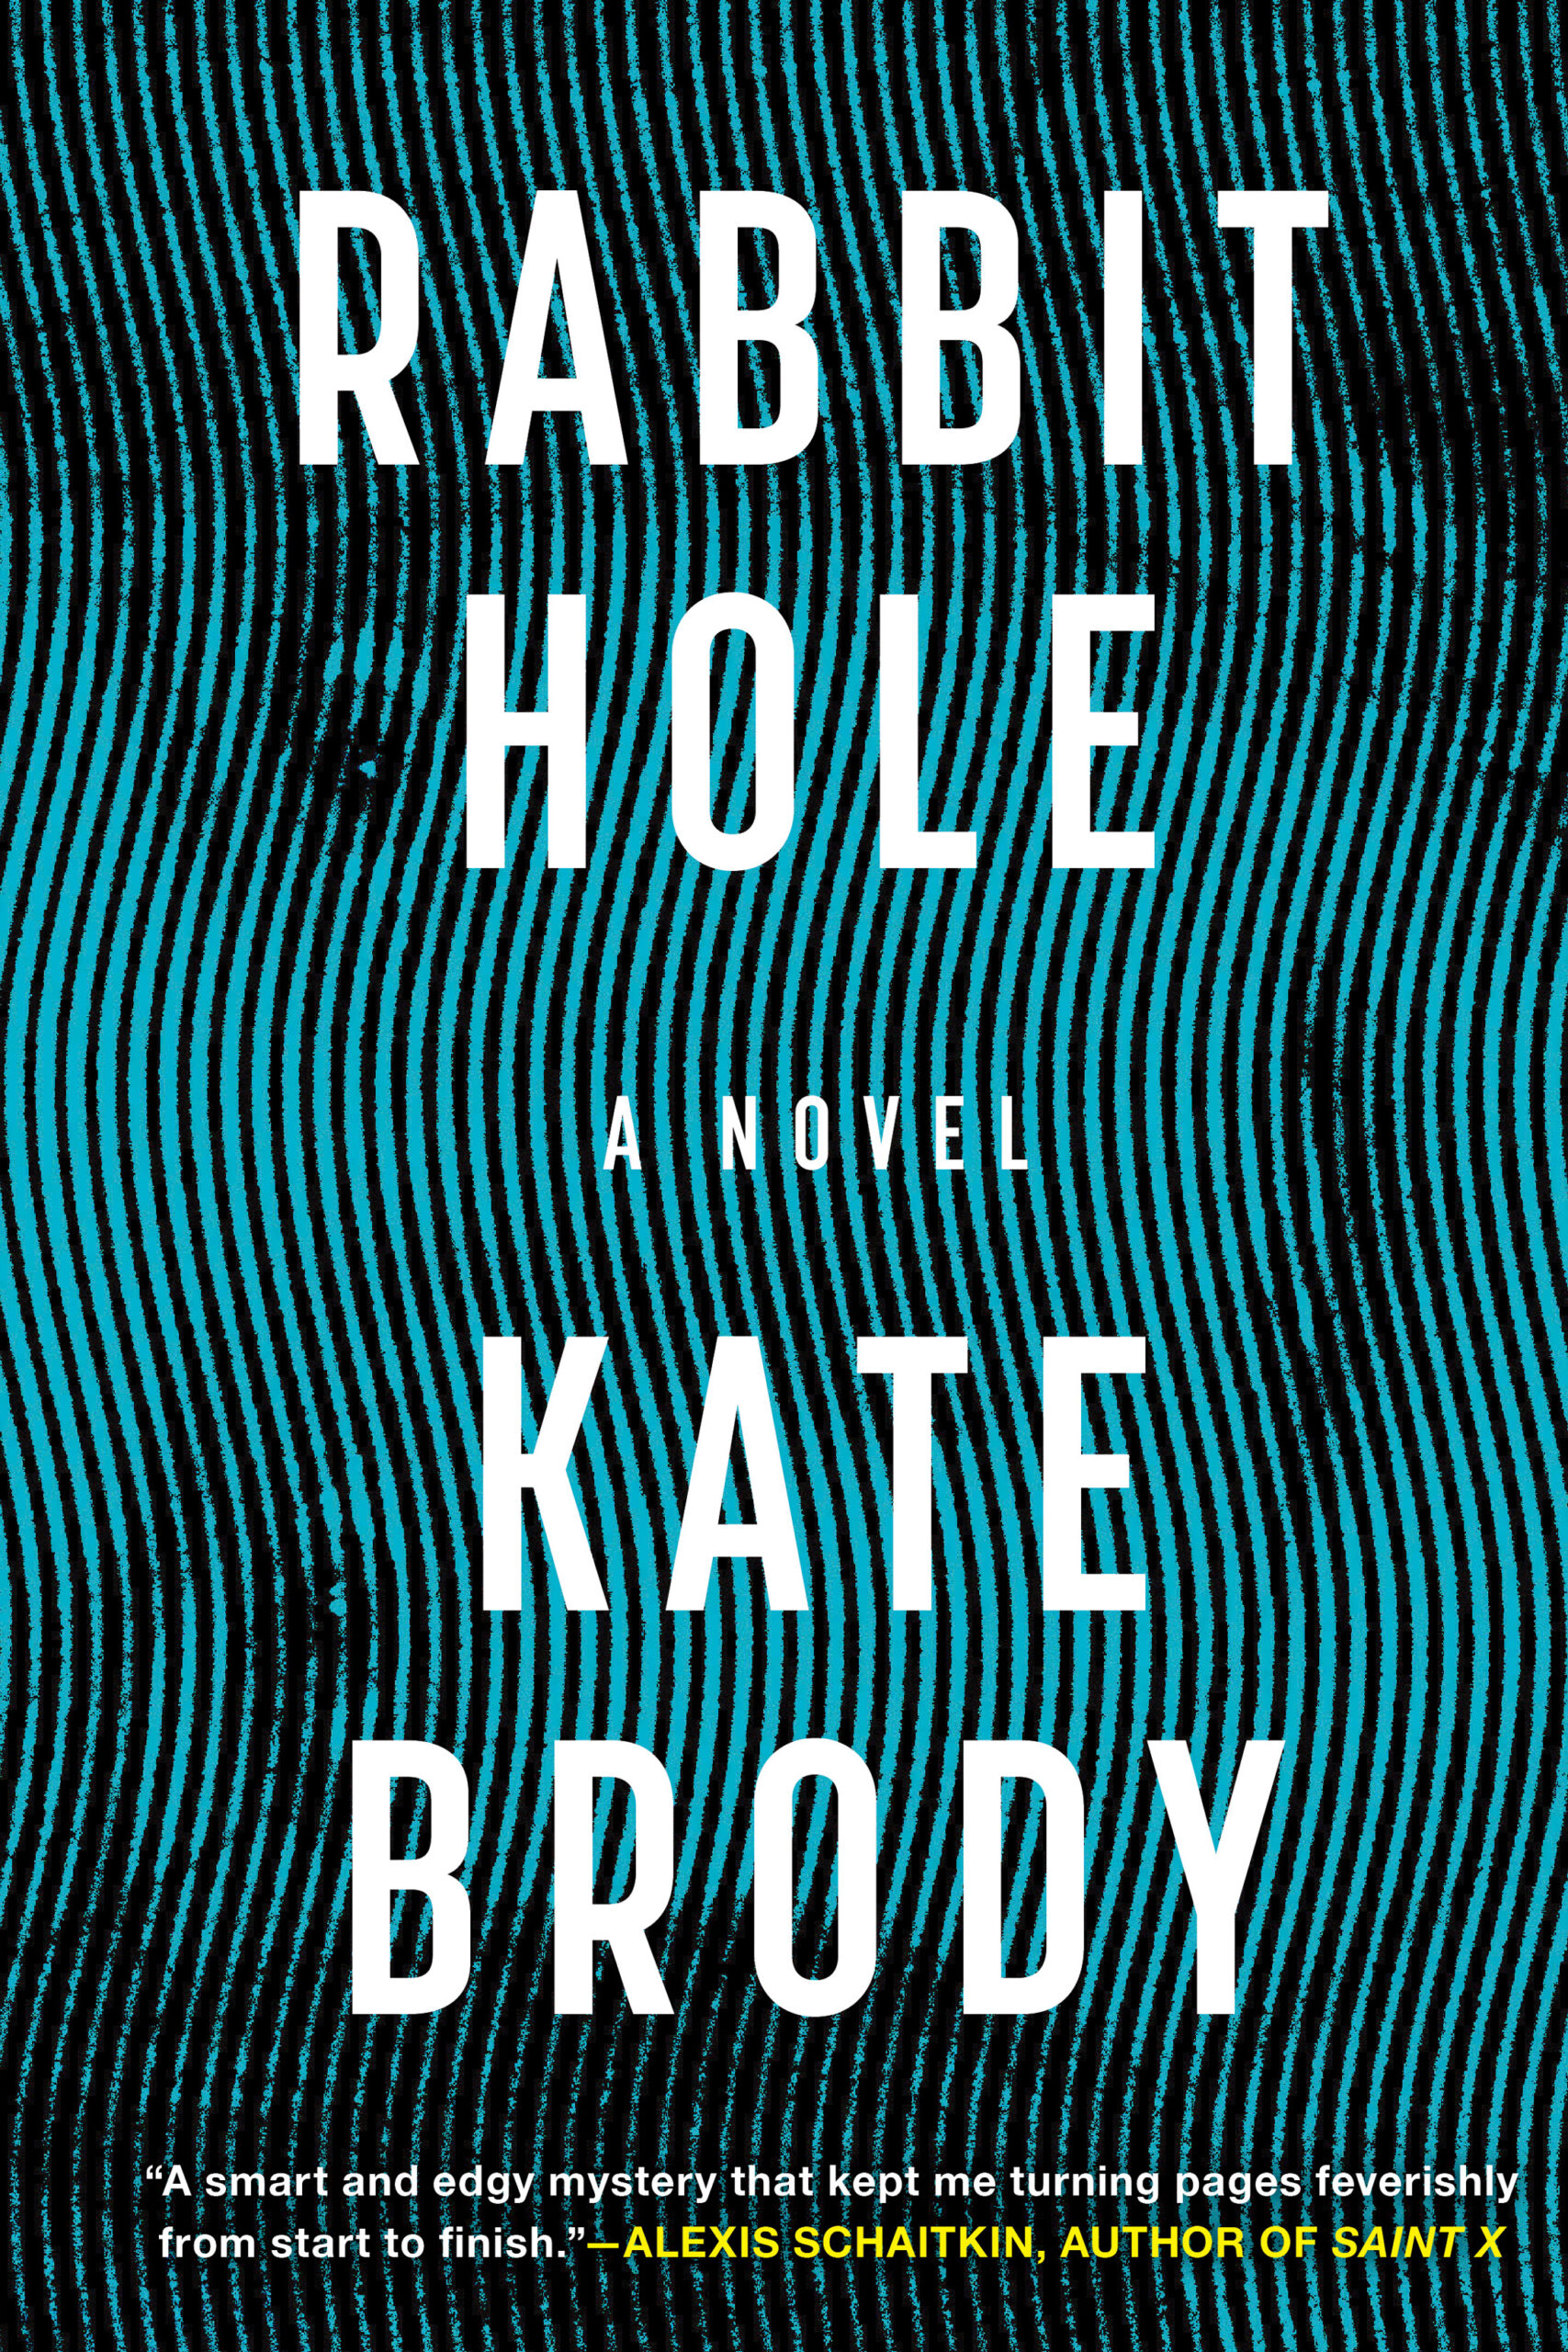 One of our recommended books is Rabbit Hole by Kate Brody